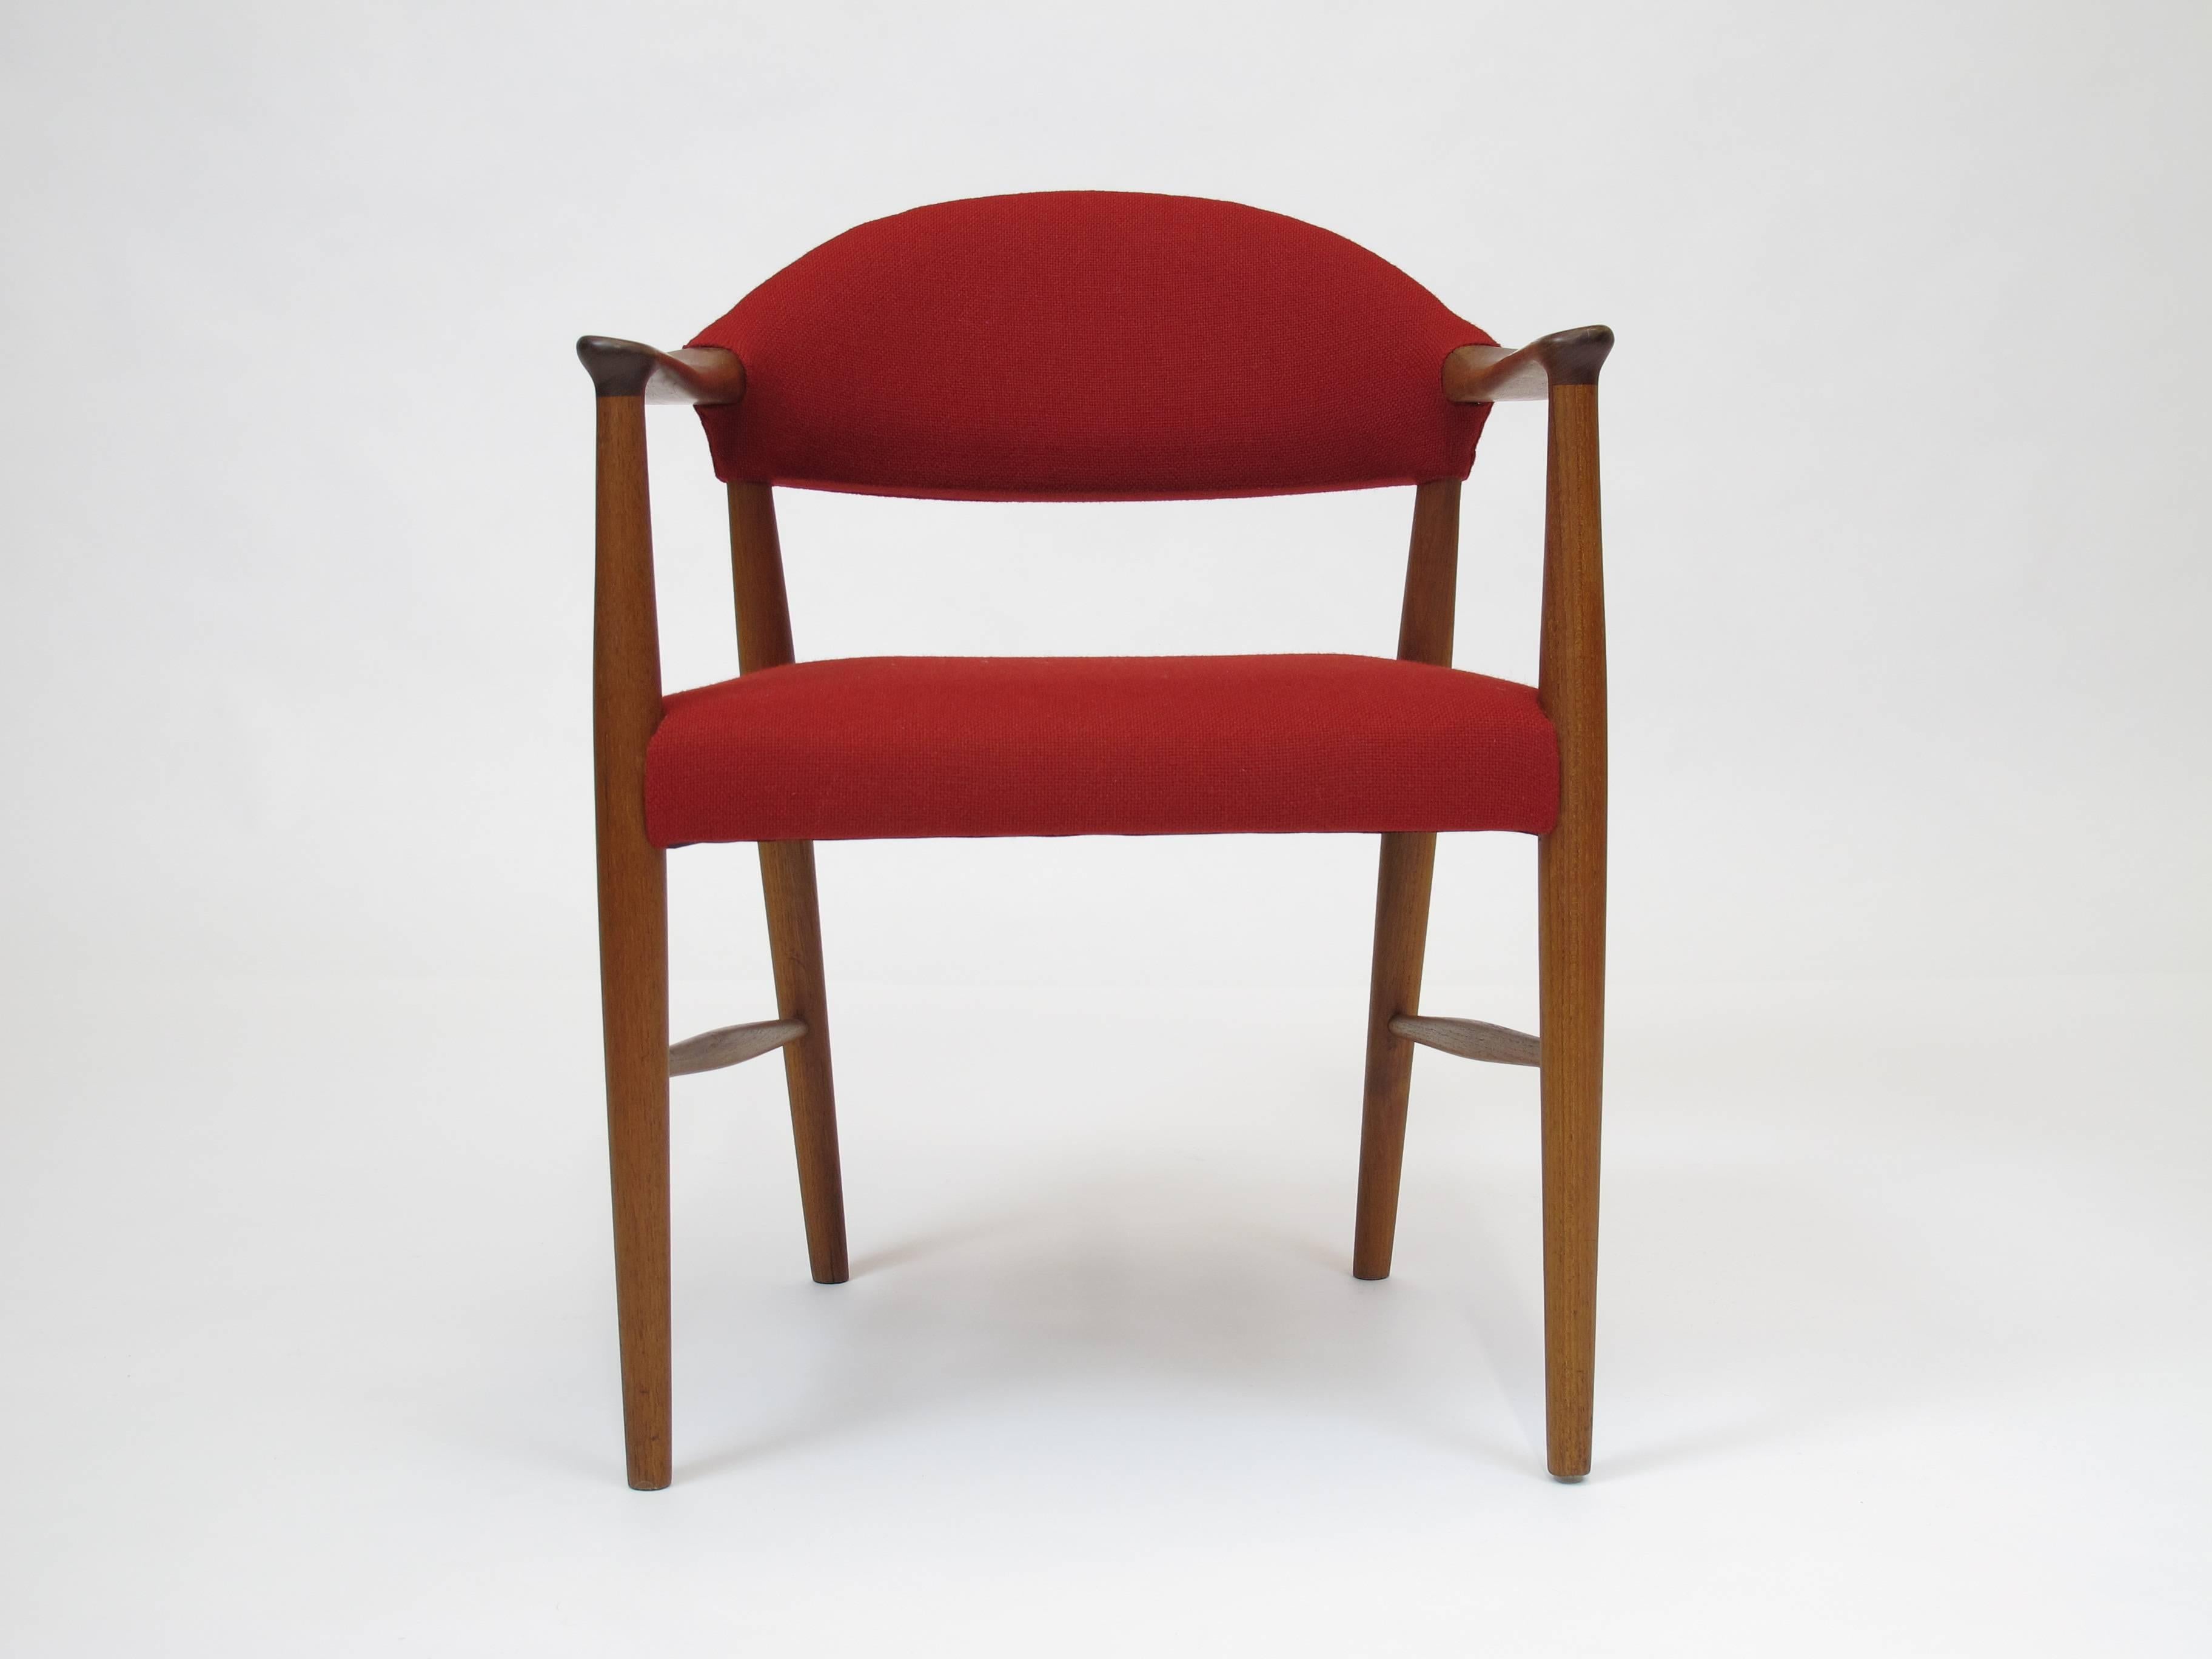 Pair of mid-century teak armchairs designed by Kurt Olsen.  Newly upholstered in a Scandinavian red wool textile. Seat constructed of rubber stamps covered in foam and fabric. Fabric sample available upon request.